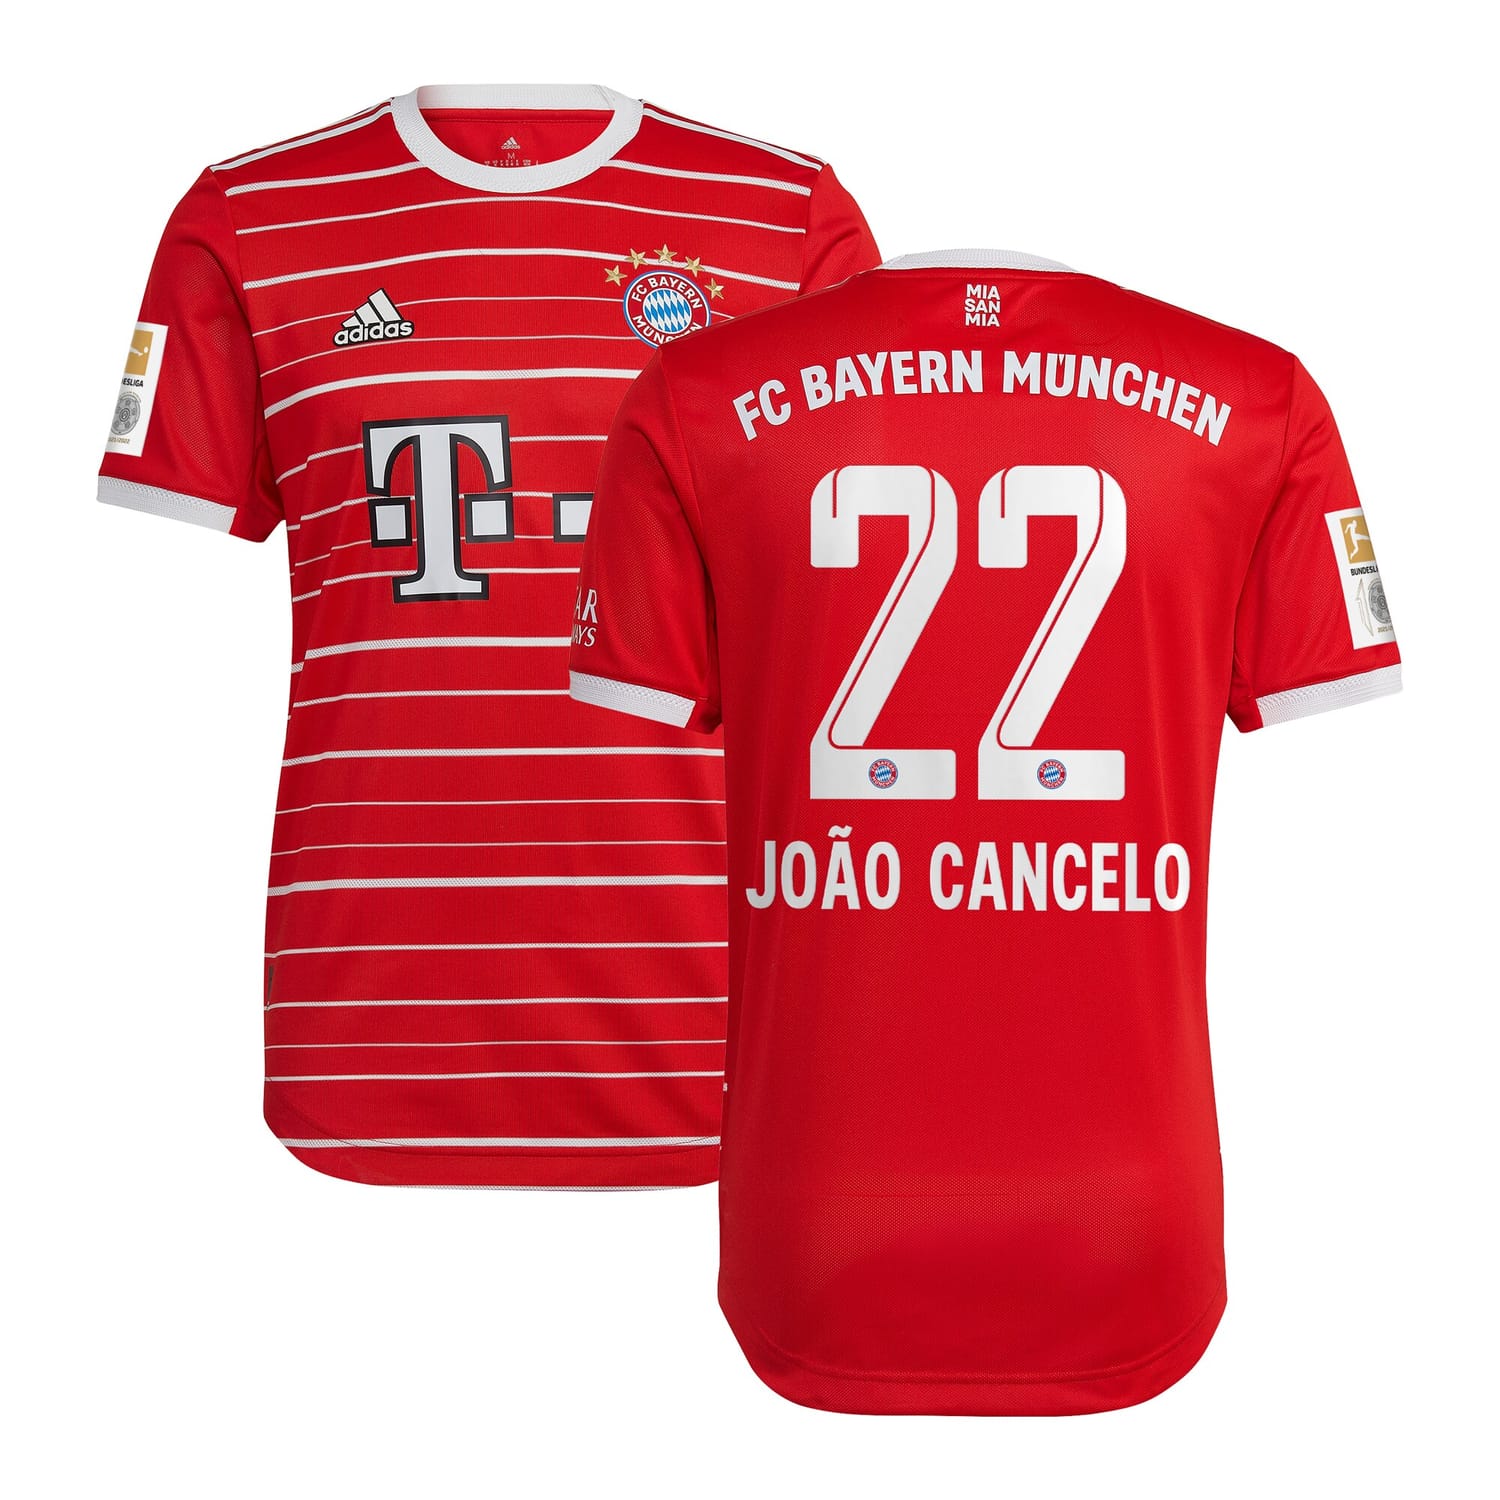 Bundesliga Bayern Munich Home Authentic Jersey Shirt Red 2022-23 player Joao Cancelo printing for Men